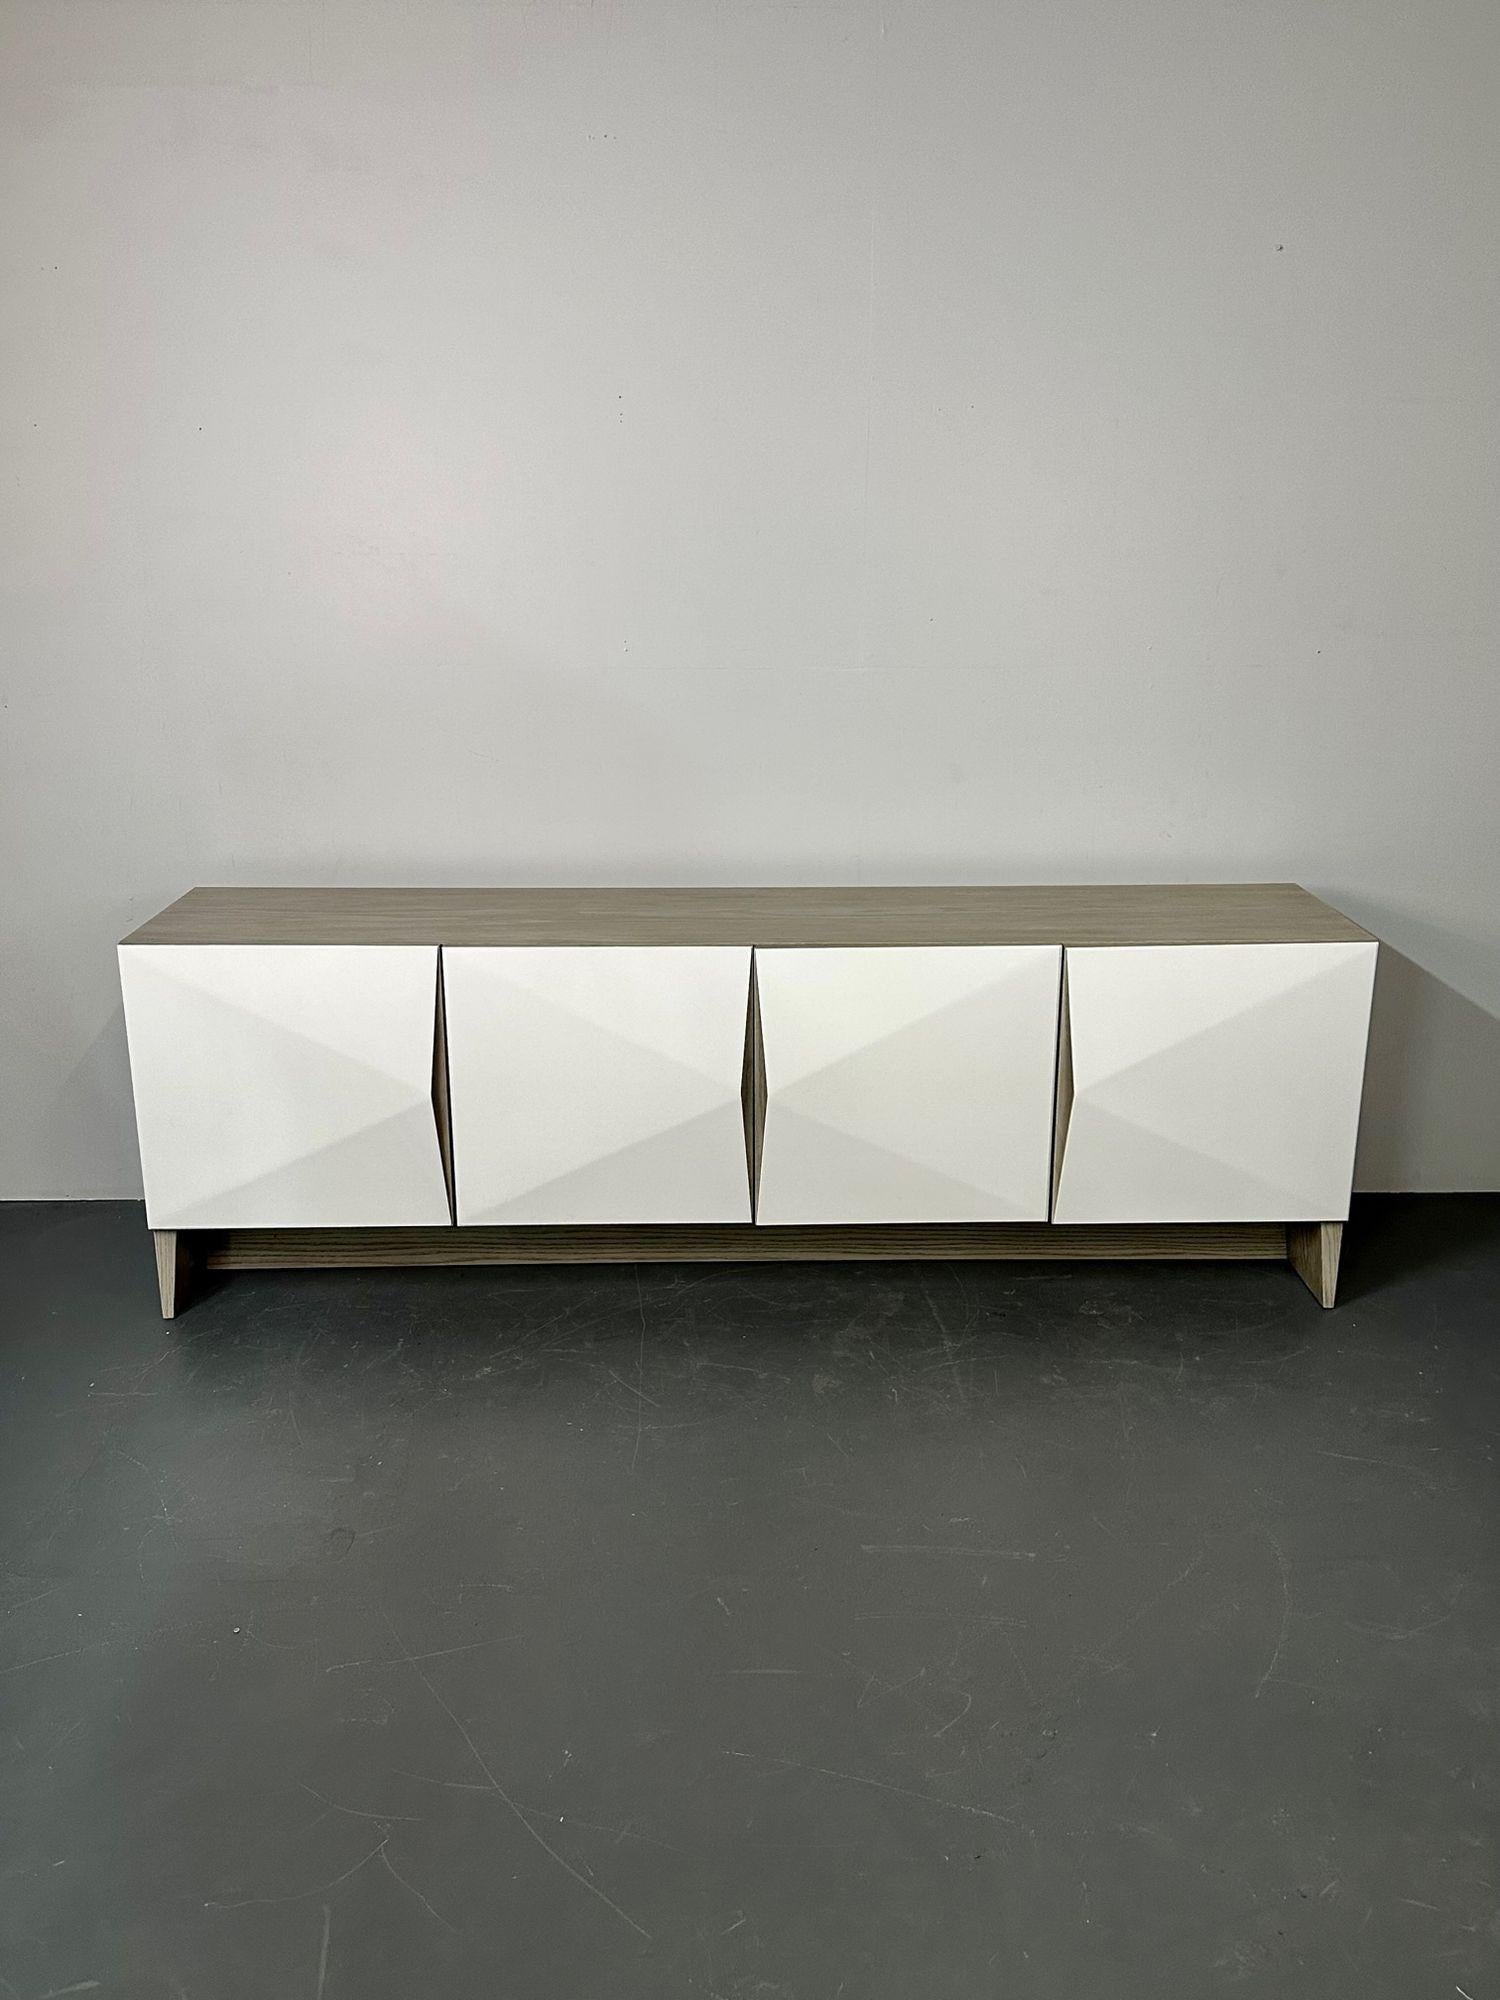 Modern Geometric Ceruse Oak Dresser, Sideboard, Cabinet, White Lacquered In Good Condition For Sale In Stamford, CT